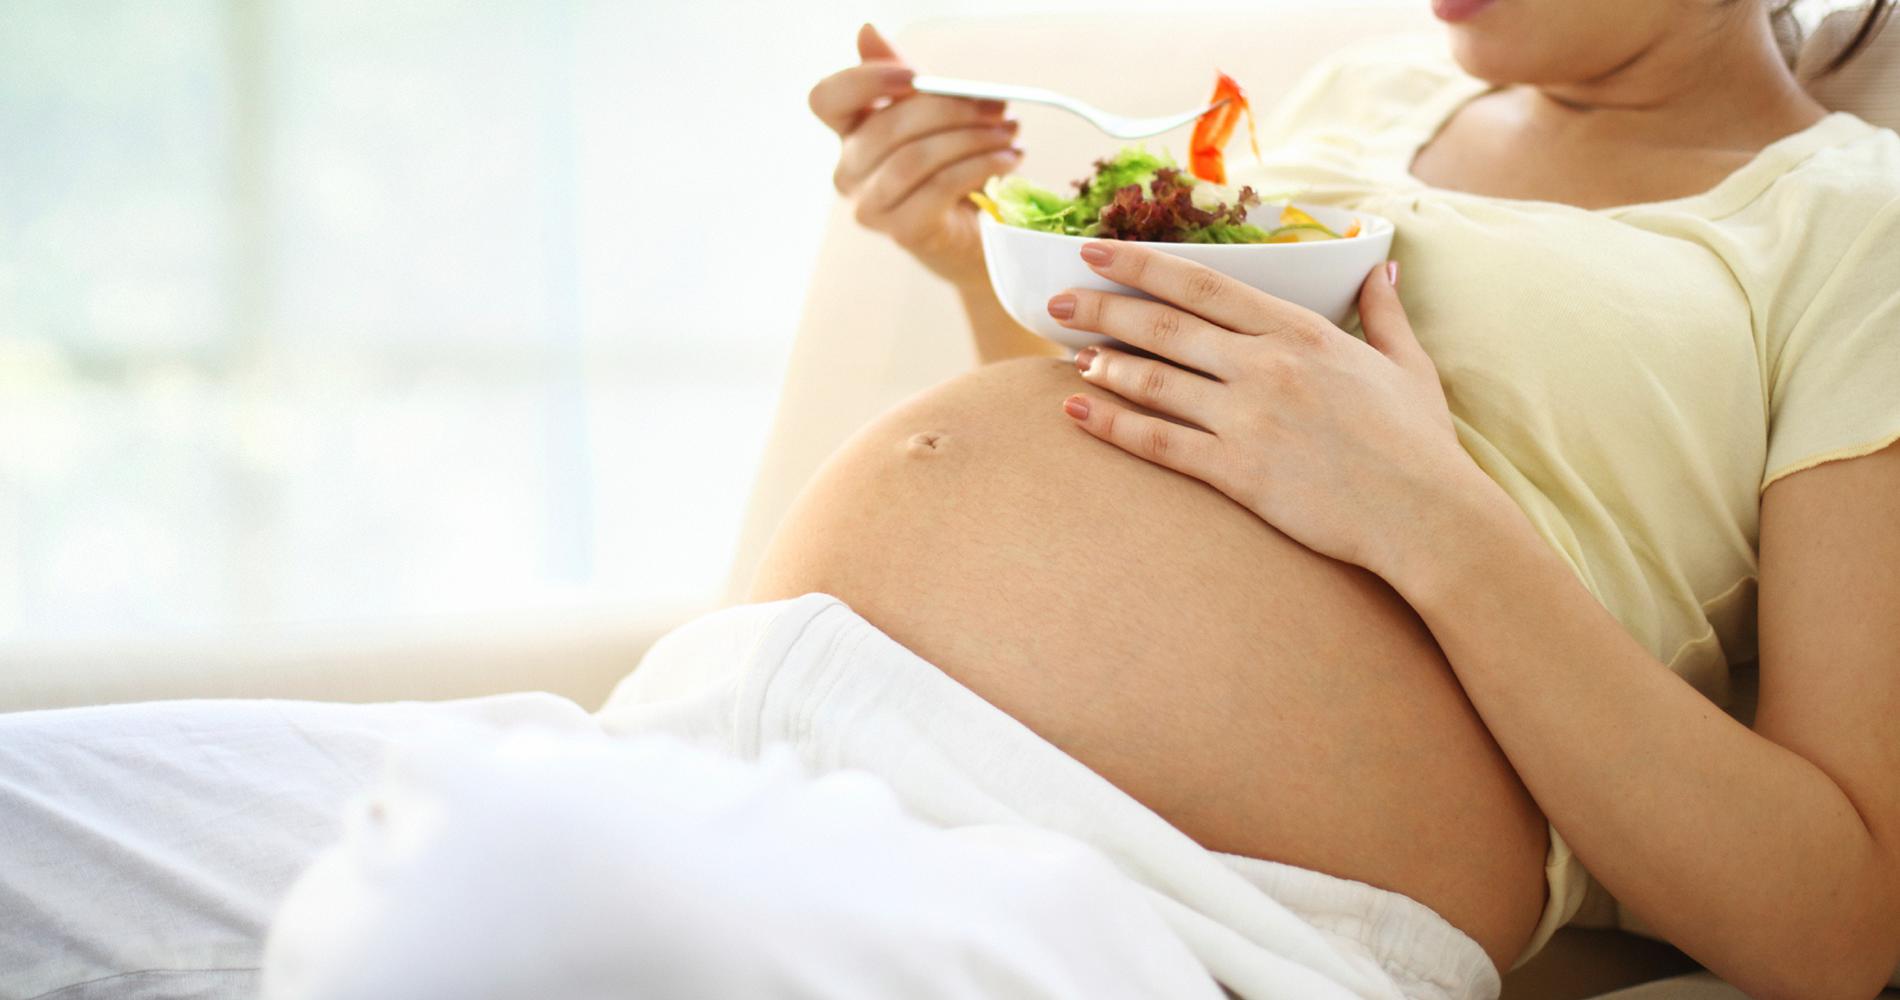 What You Should Avoid Consuming During Pregnancy?